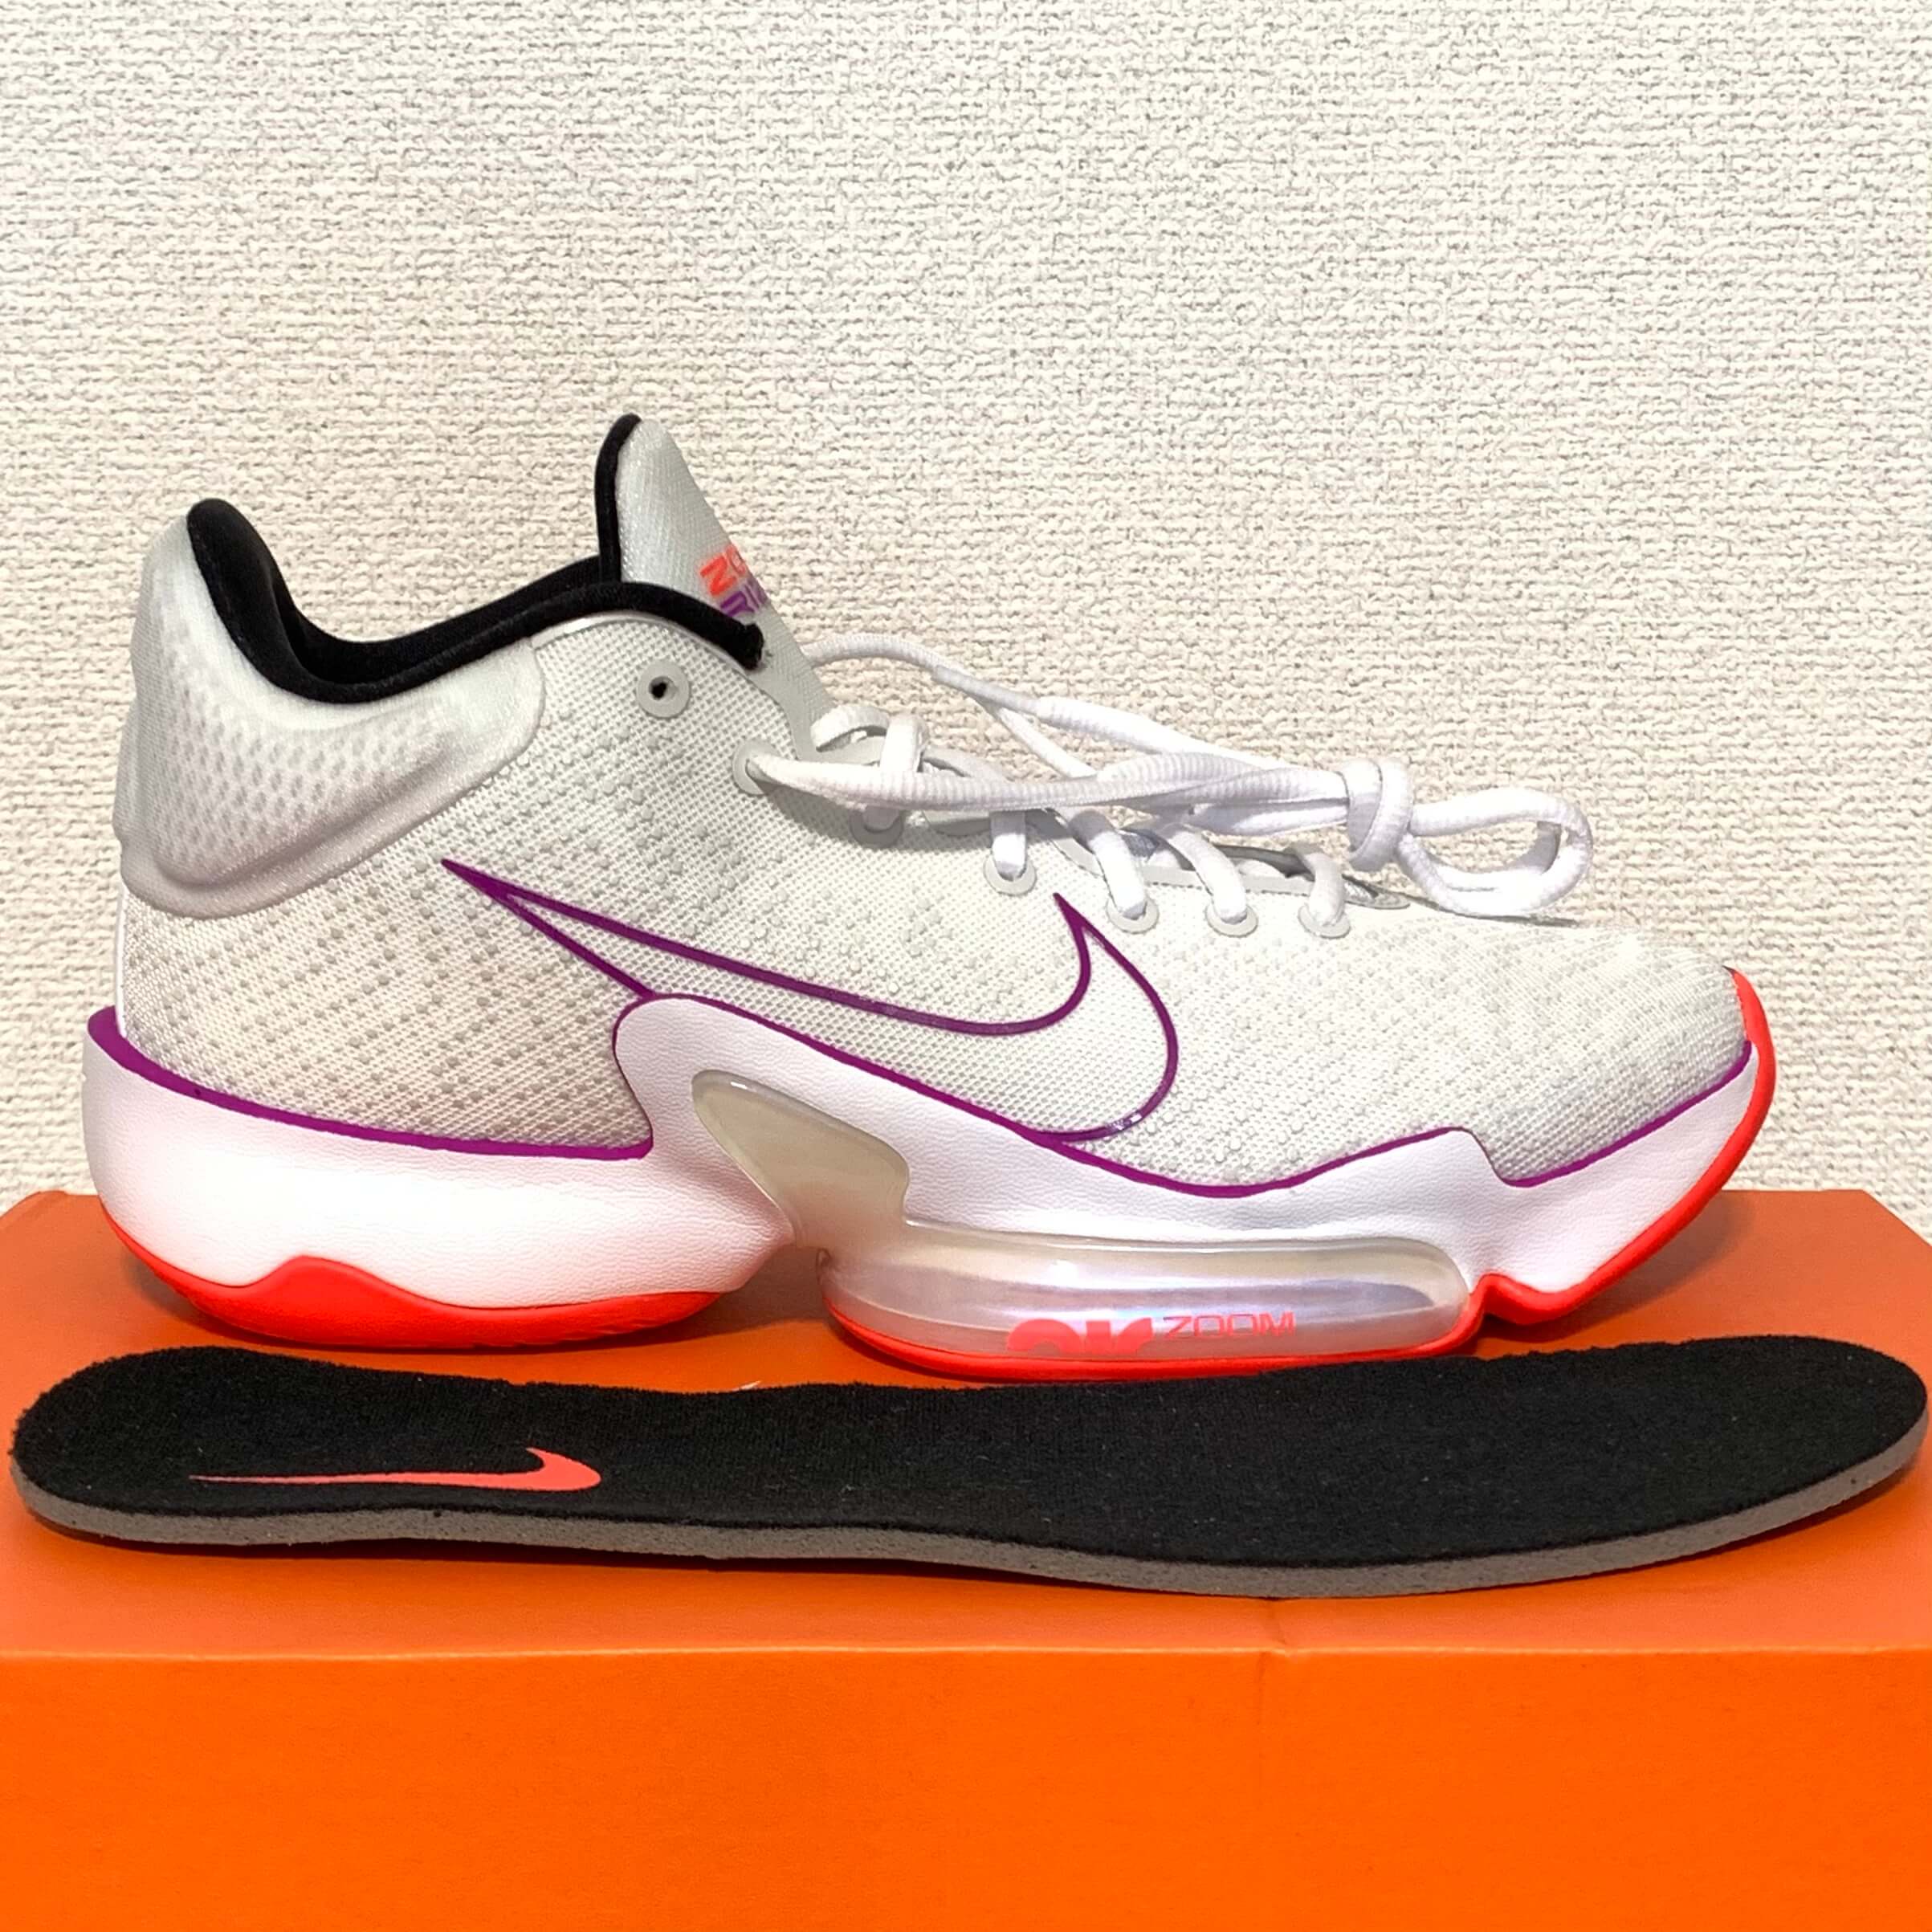 Nike Zoom Rize 2 Performance Review - ASTERKICKS